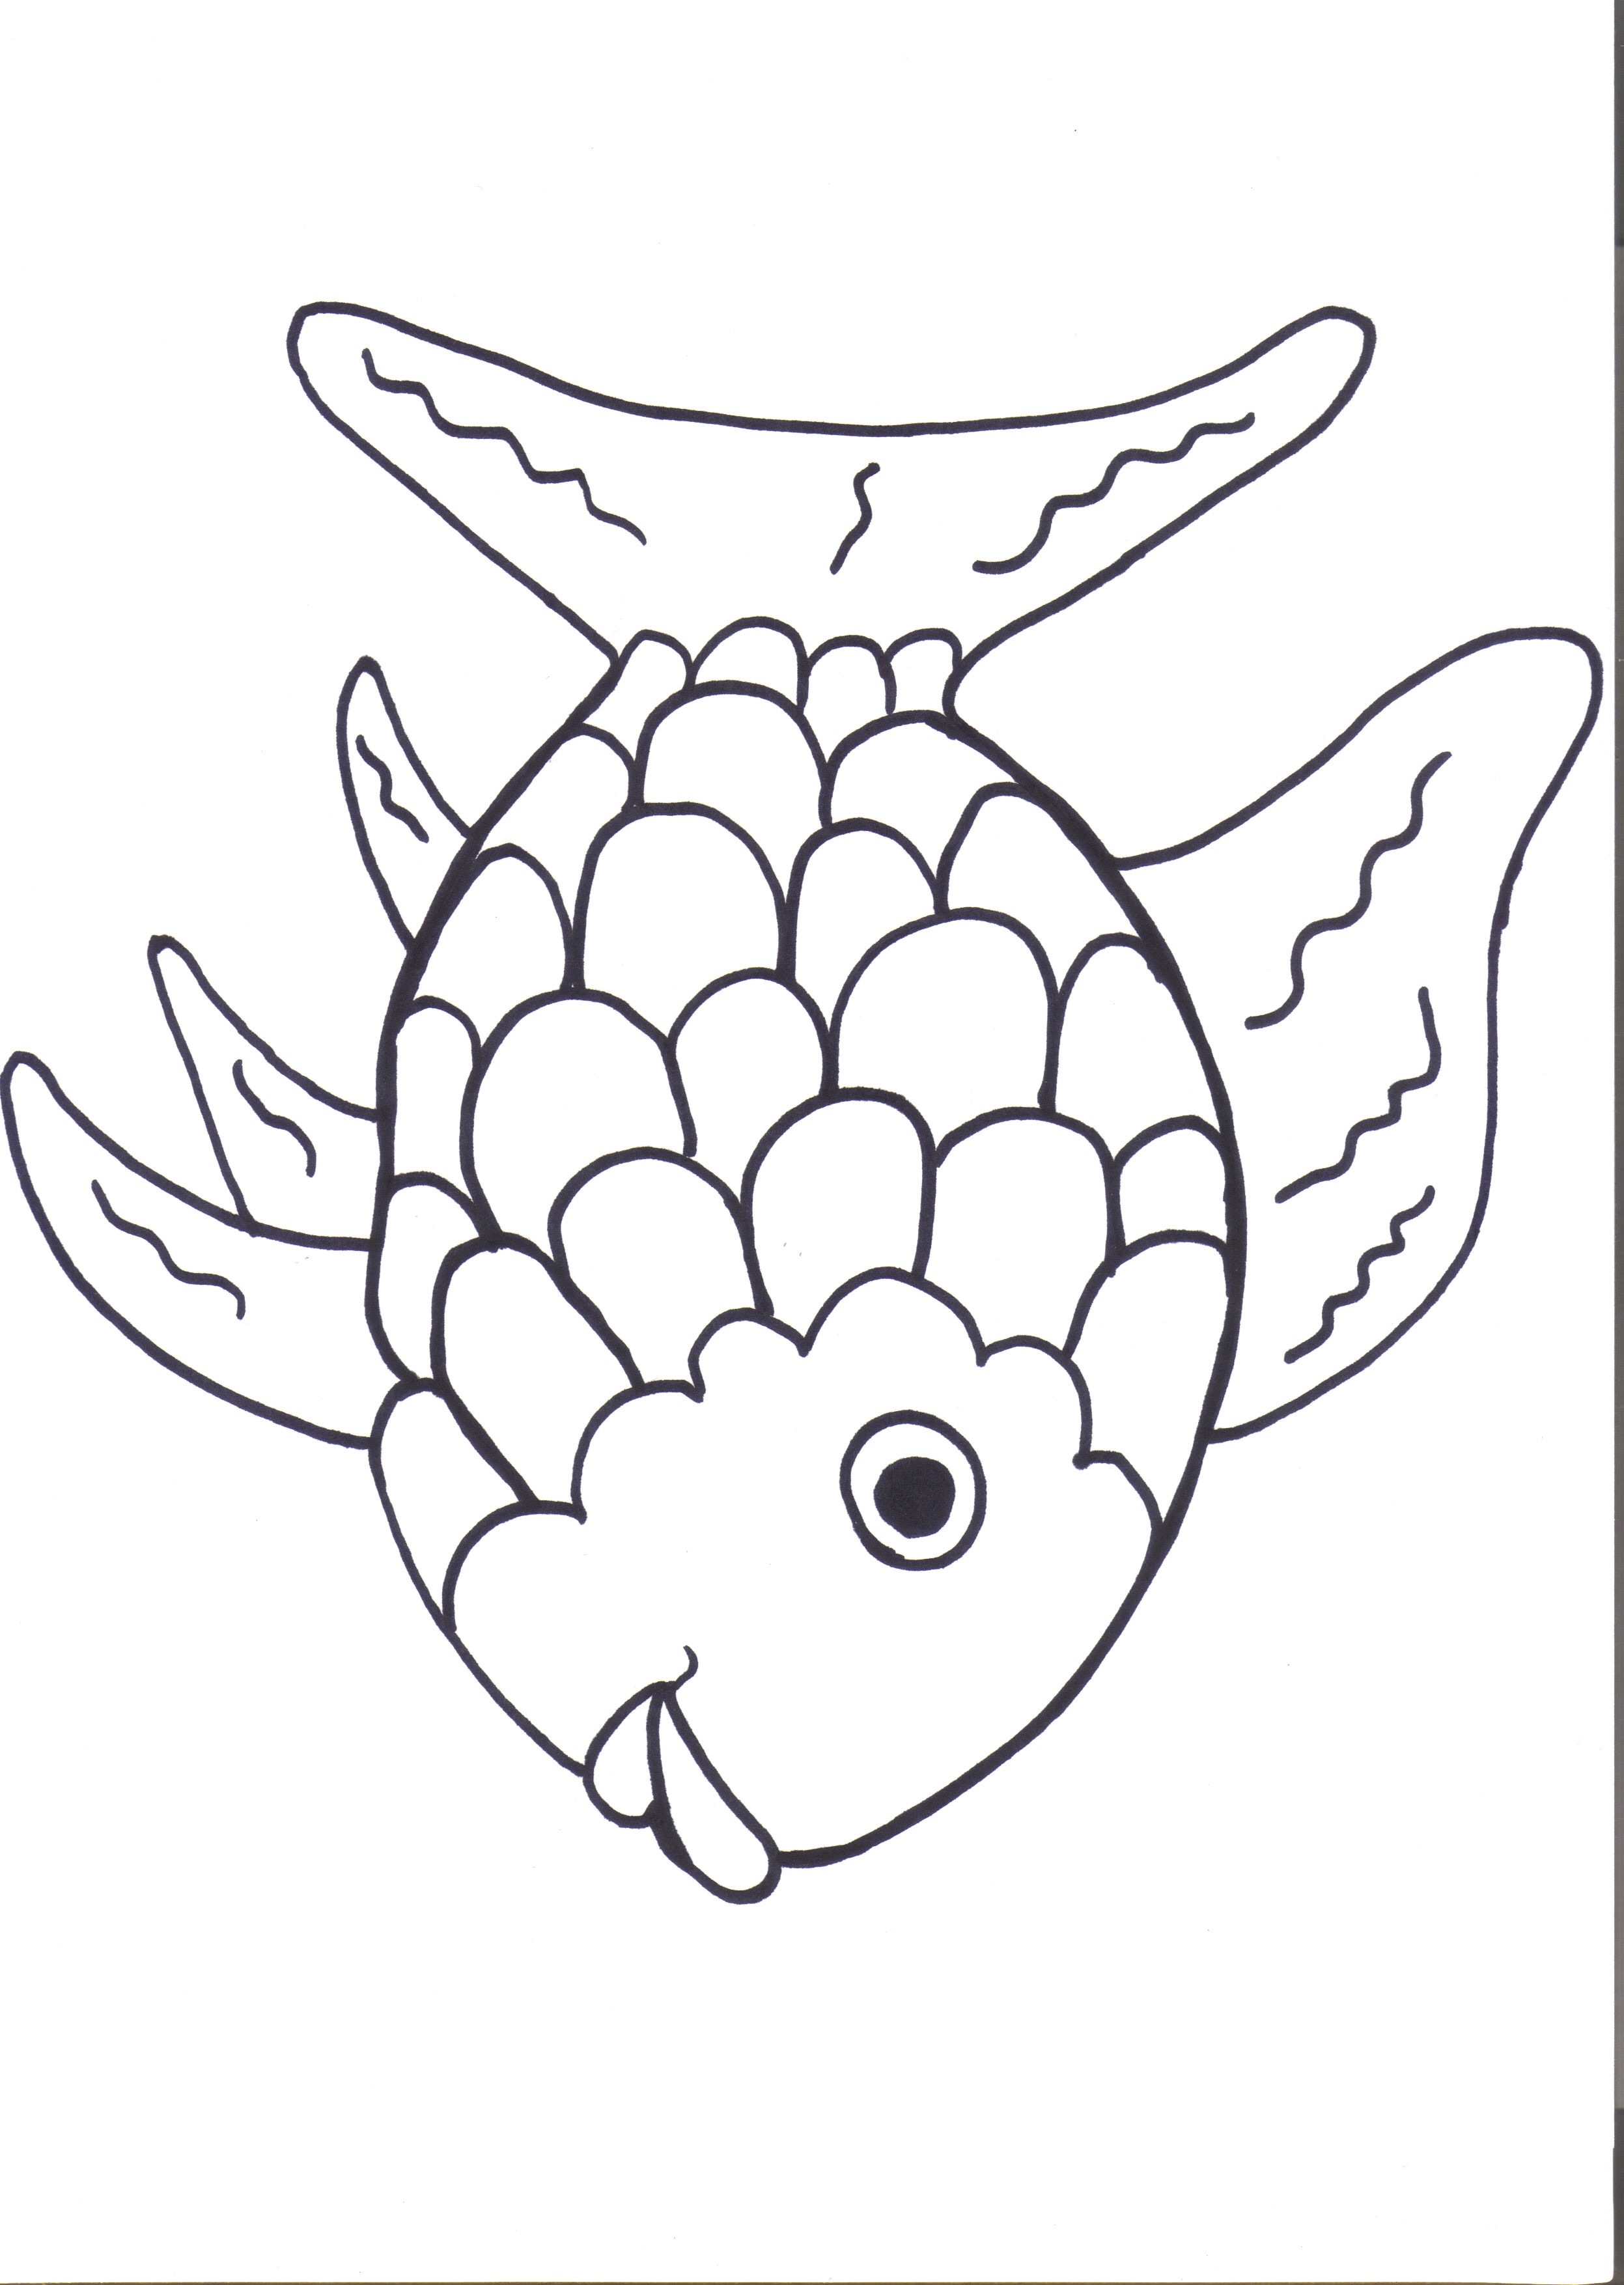 rainbow-fish-outline-cliparts-co